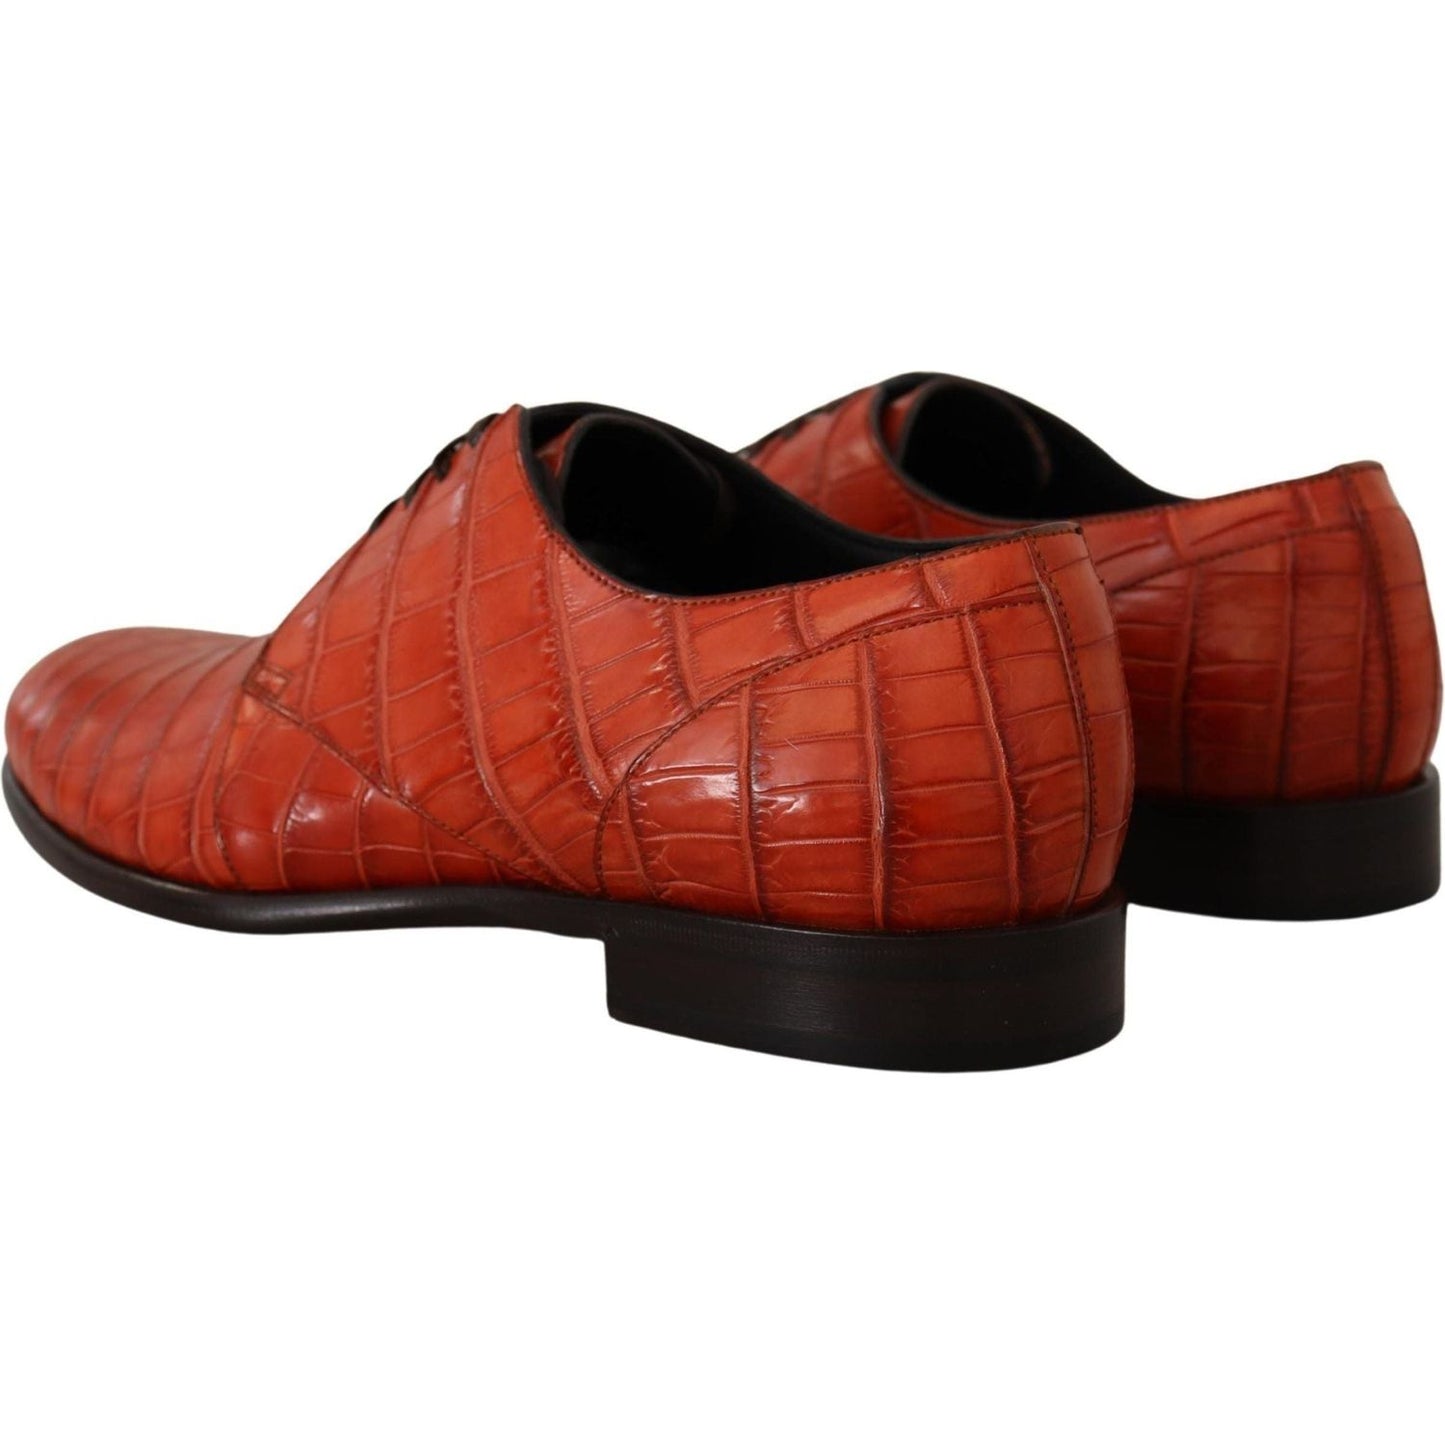 Dolce & Gabbana Exquisite Exotic Croc Leather Lace-Up Dress Shoes orange-exotic-leather-dress-derby-shoes IMG_2146-scaled-ca0a249f-cbc.jpg